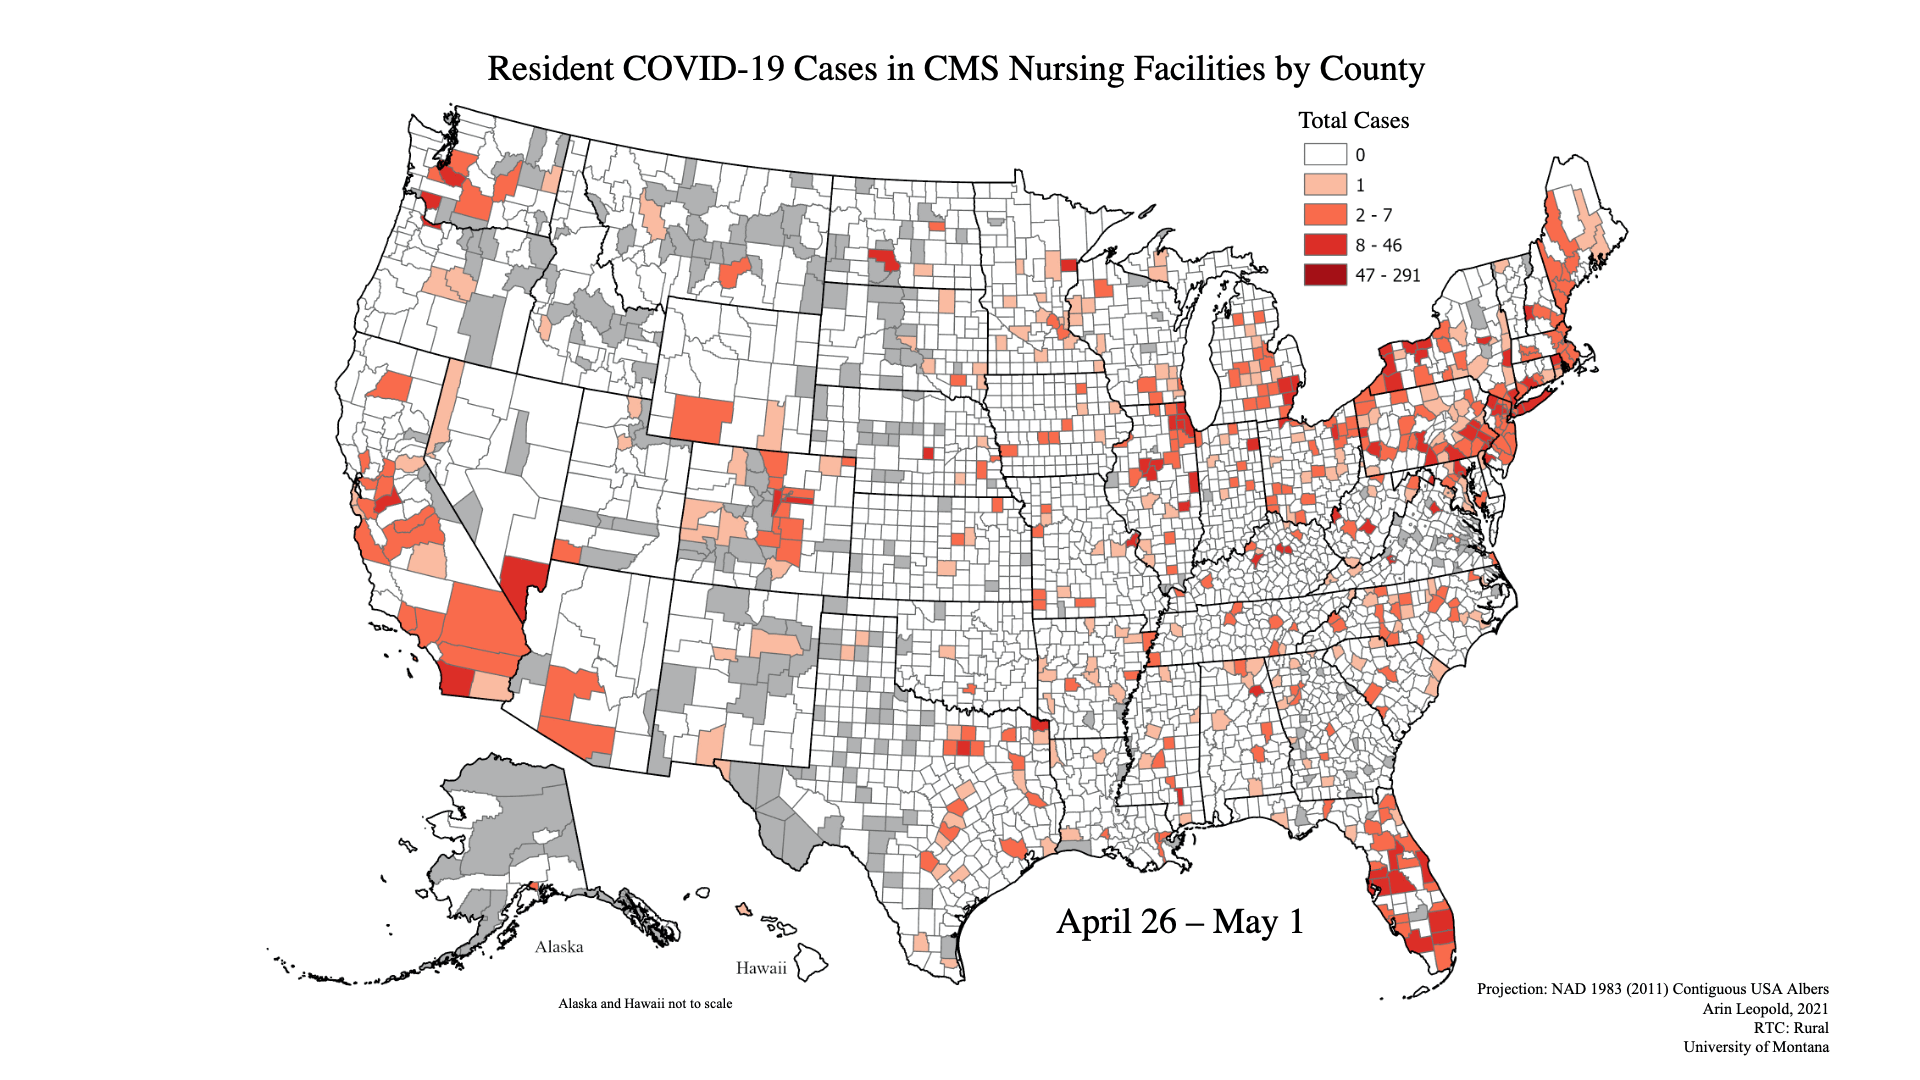 Animated graphic showing growth of COVID-19 cases in CMS nursing facilities over a 14-week period. Clusters of counties on May 2 have outbreaks of up to 46 cases. By August 8 it's up to levels of 291 cases, with much more of the country in with outbreak regions